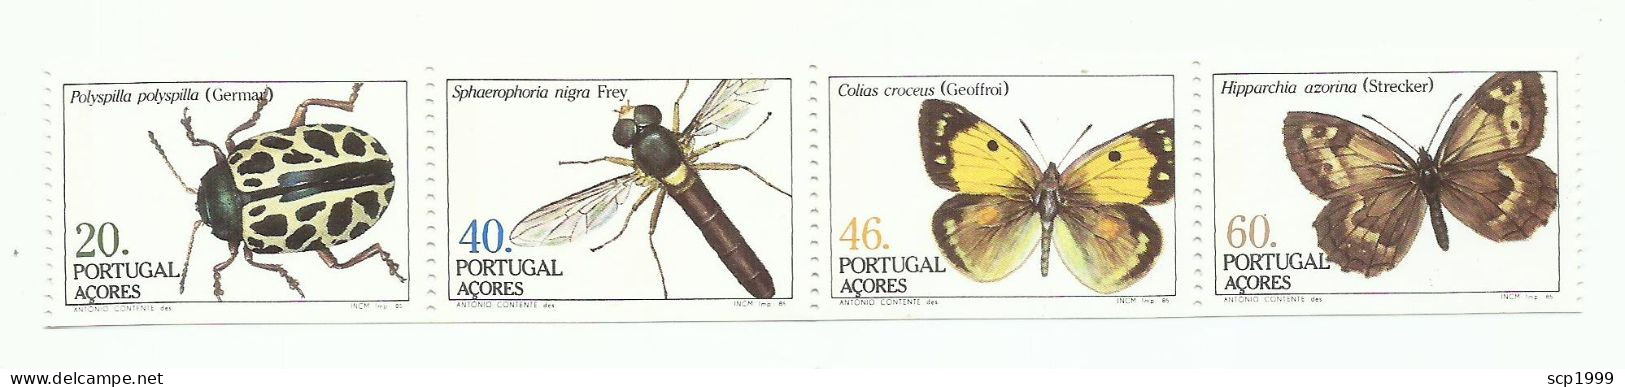 Portugal 1985 - Azores Insects Booklet MNH - Booklets